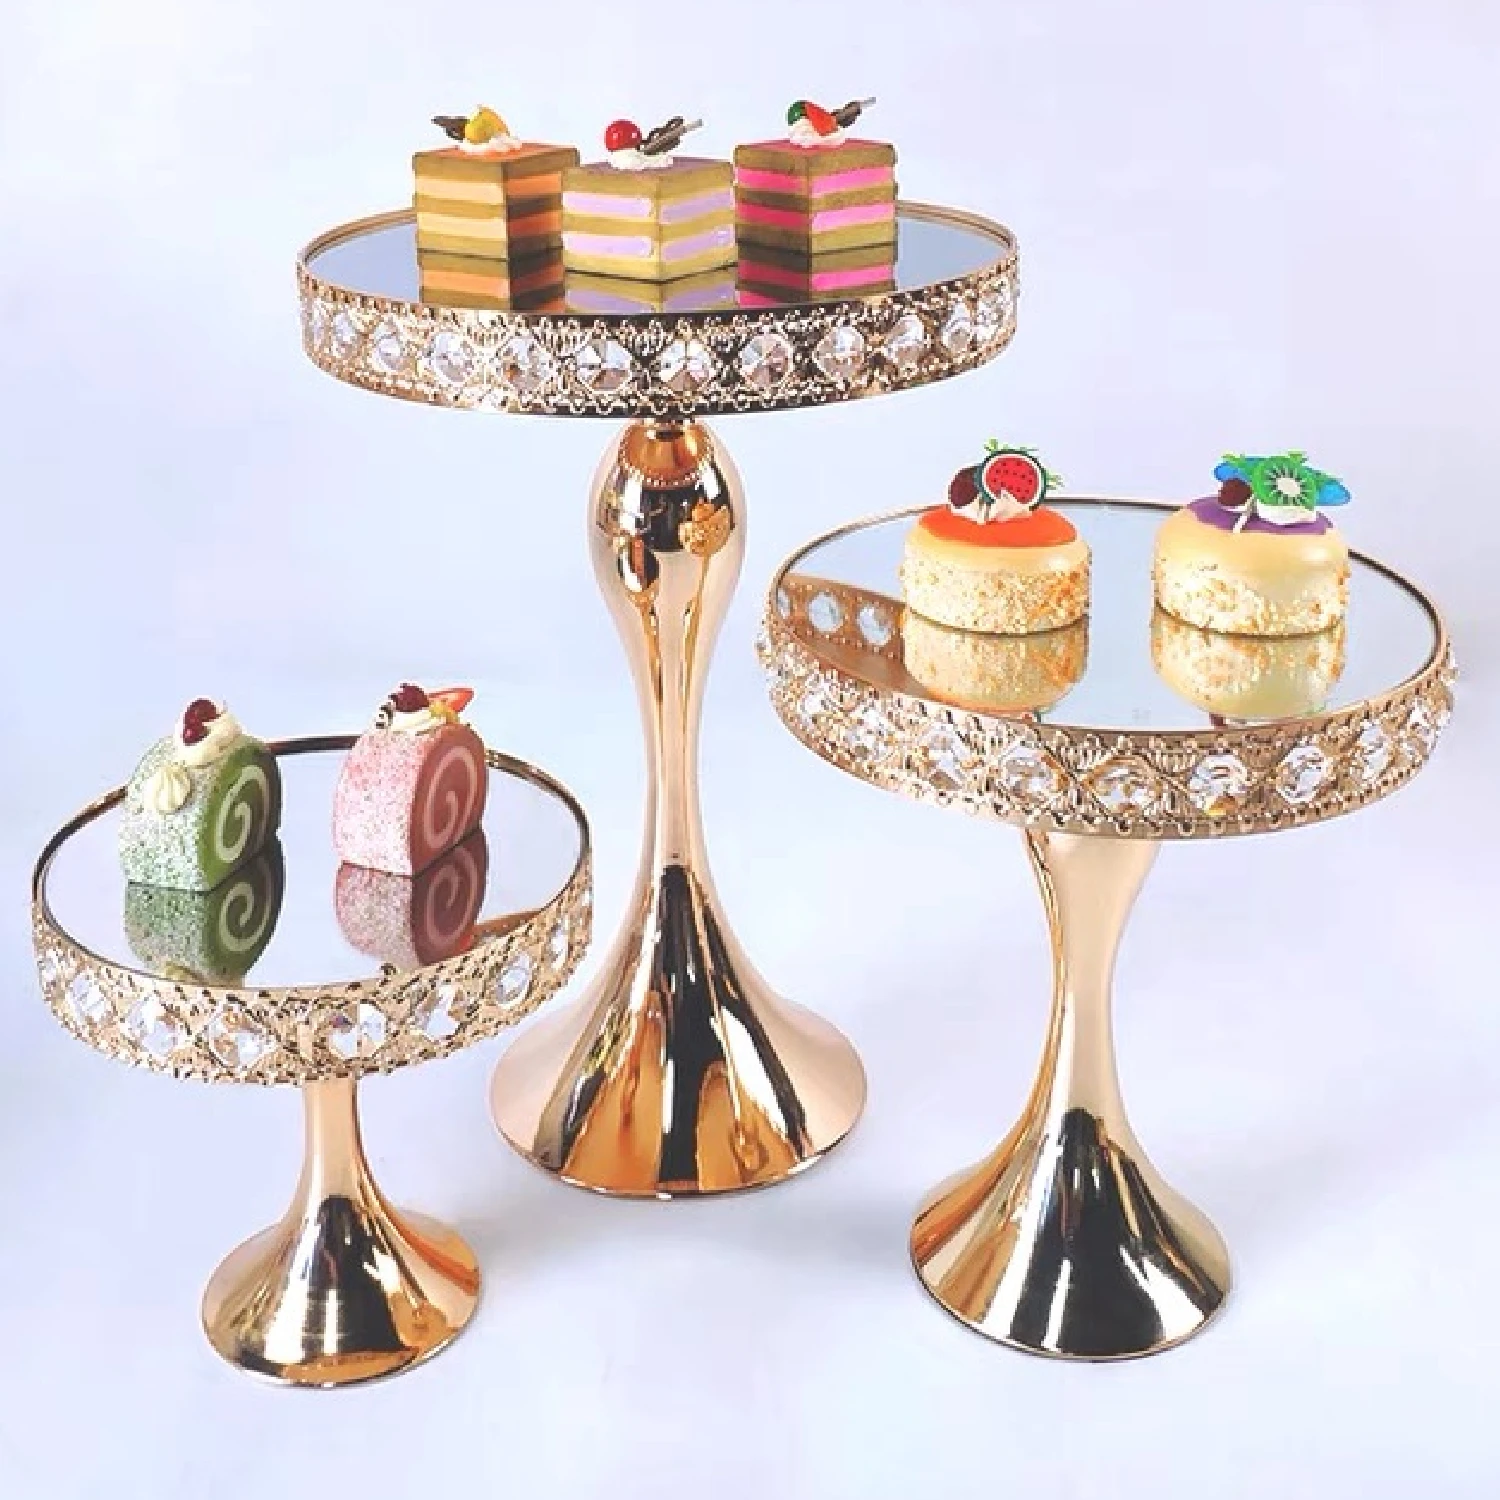 

Cake Stand, Dessert Cupcake Pastry Candy Display Plate for Wedding Event Birthday Party, Round Metal Pedestal Holder